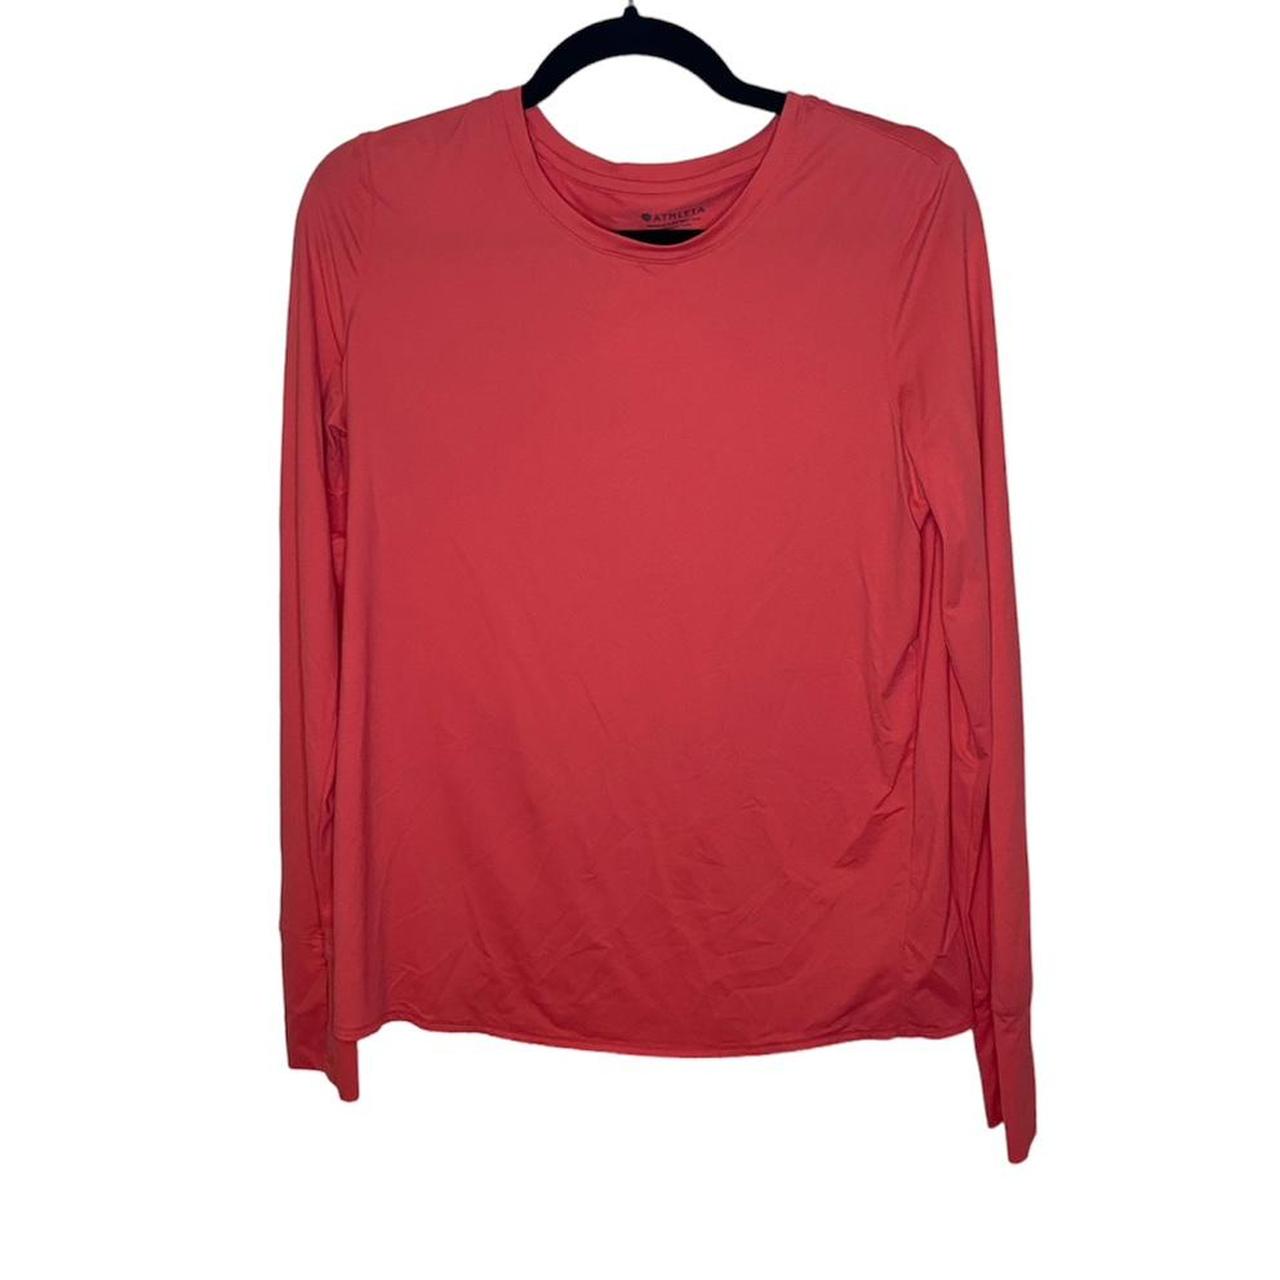 Athleta Women's Long Sleeve Top Red With Thumb Holes- Size XL